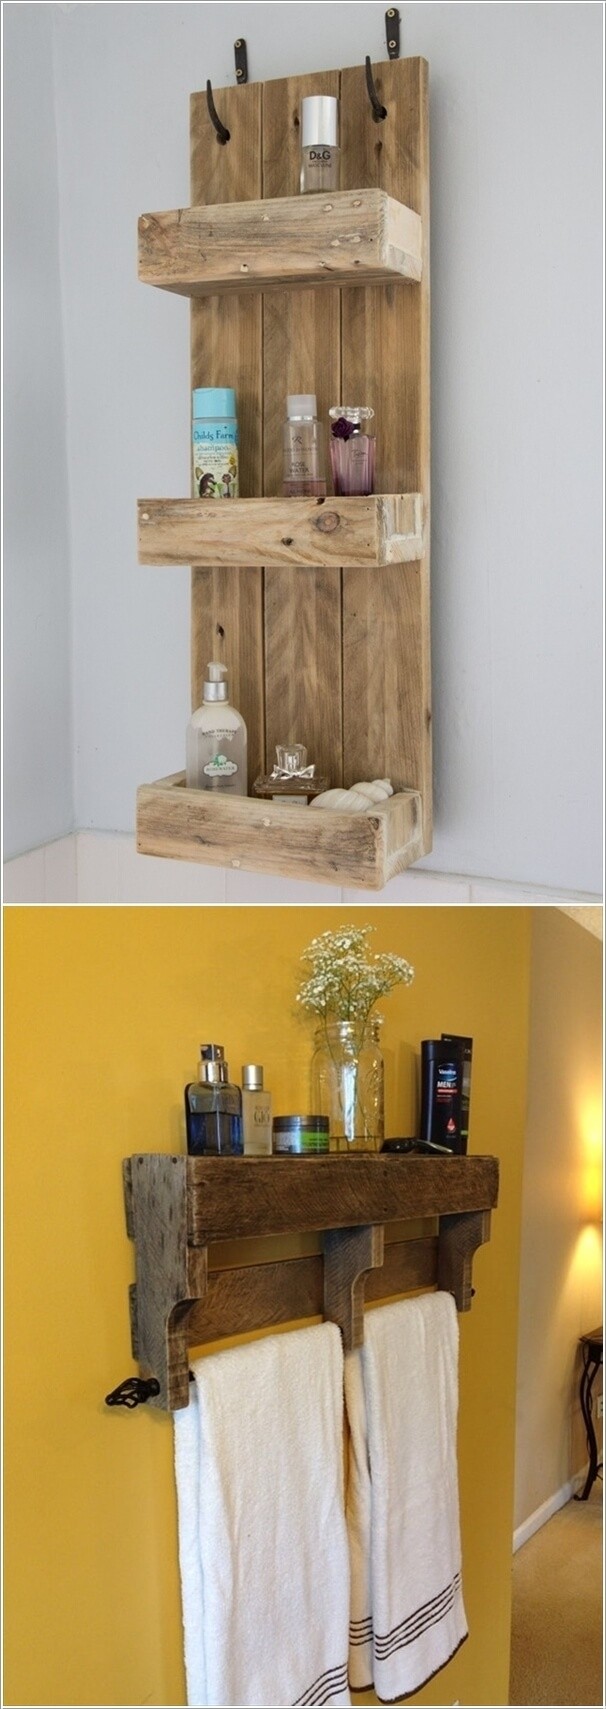 Create wall storage in your bathroom with diy shelves